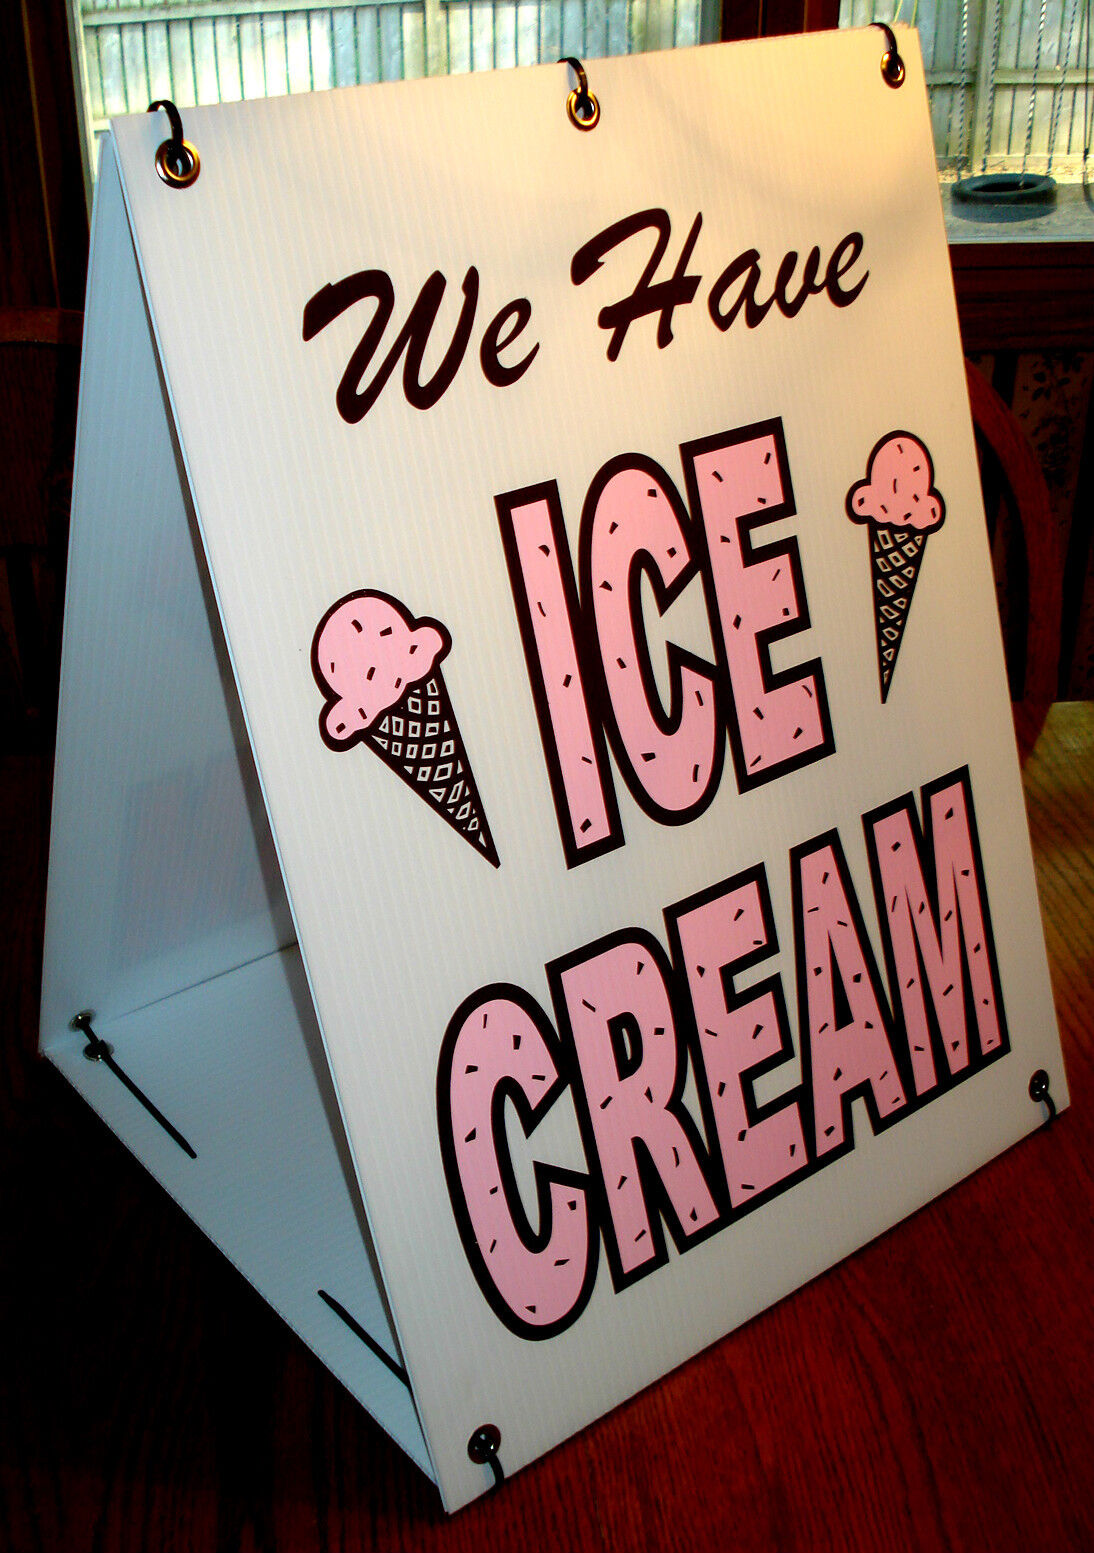 We Have ICE CREAM 2-Sided Sandwich Board Sign Kit NEW Chocolate Cherry